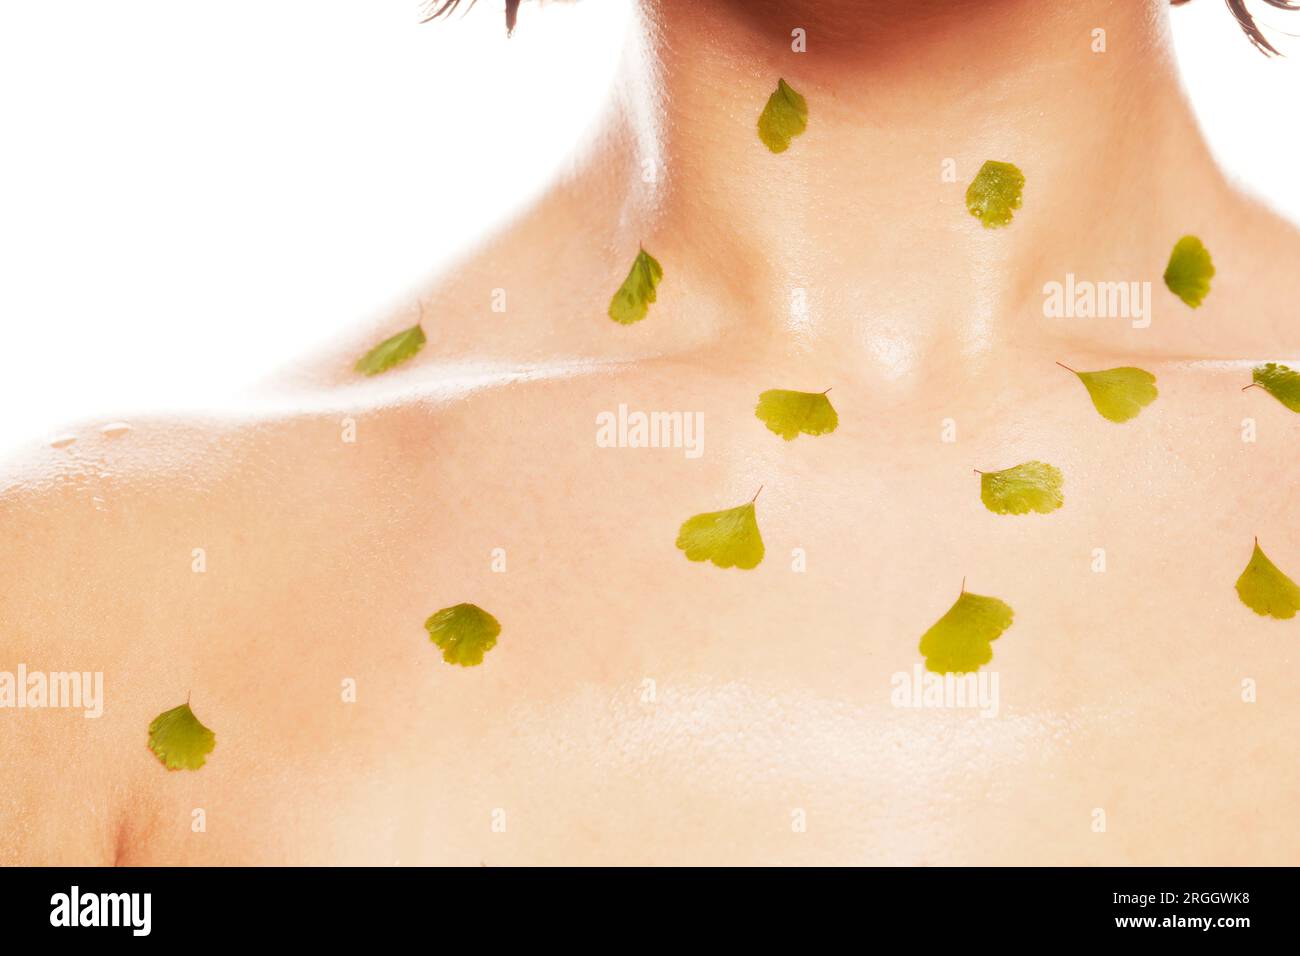 Body paint leaves on young woman's neck Stock Photo